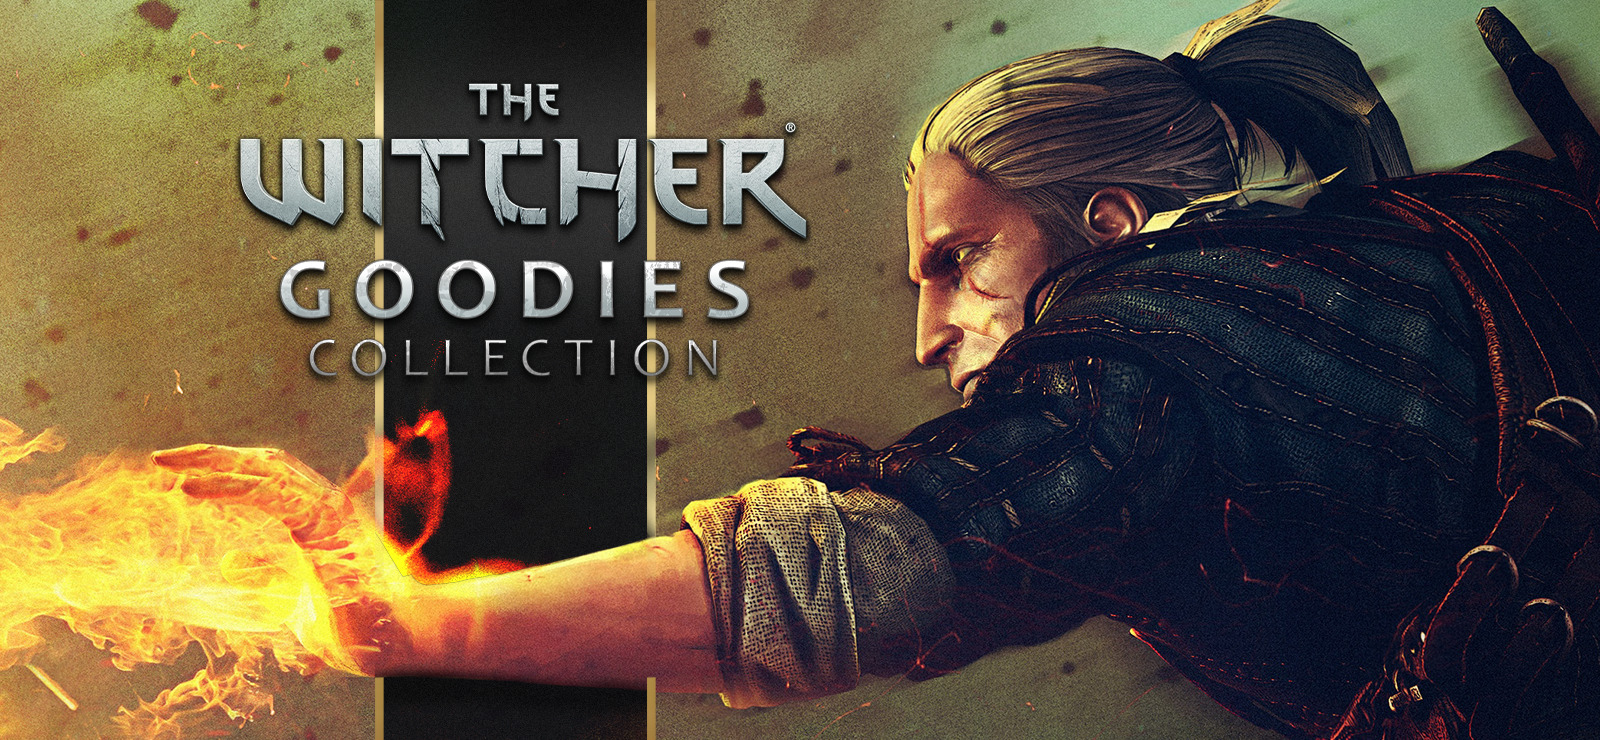 The Witcher - Goodies Collection GOG CD Key 2.54$